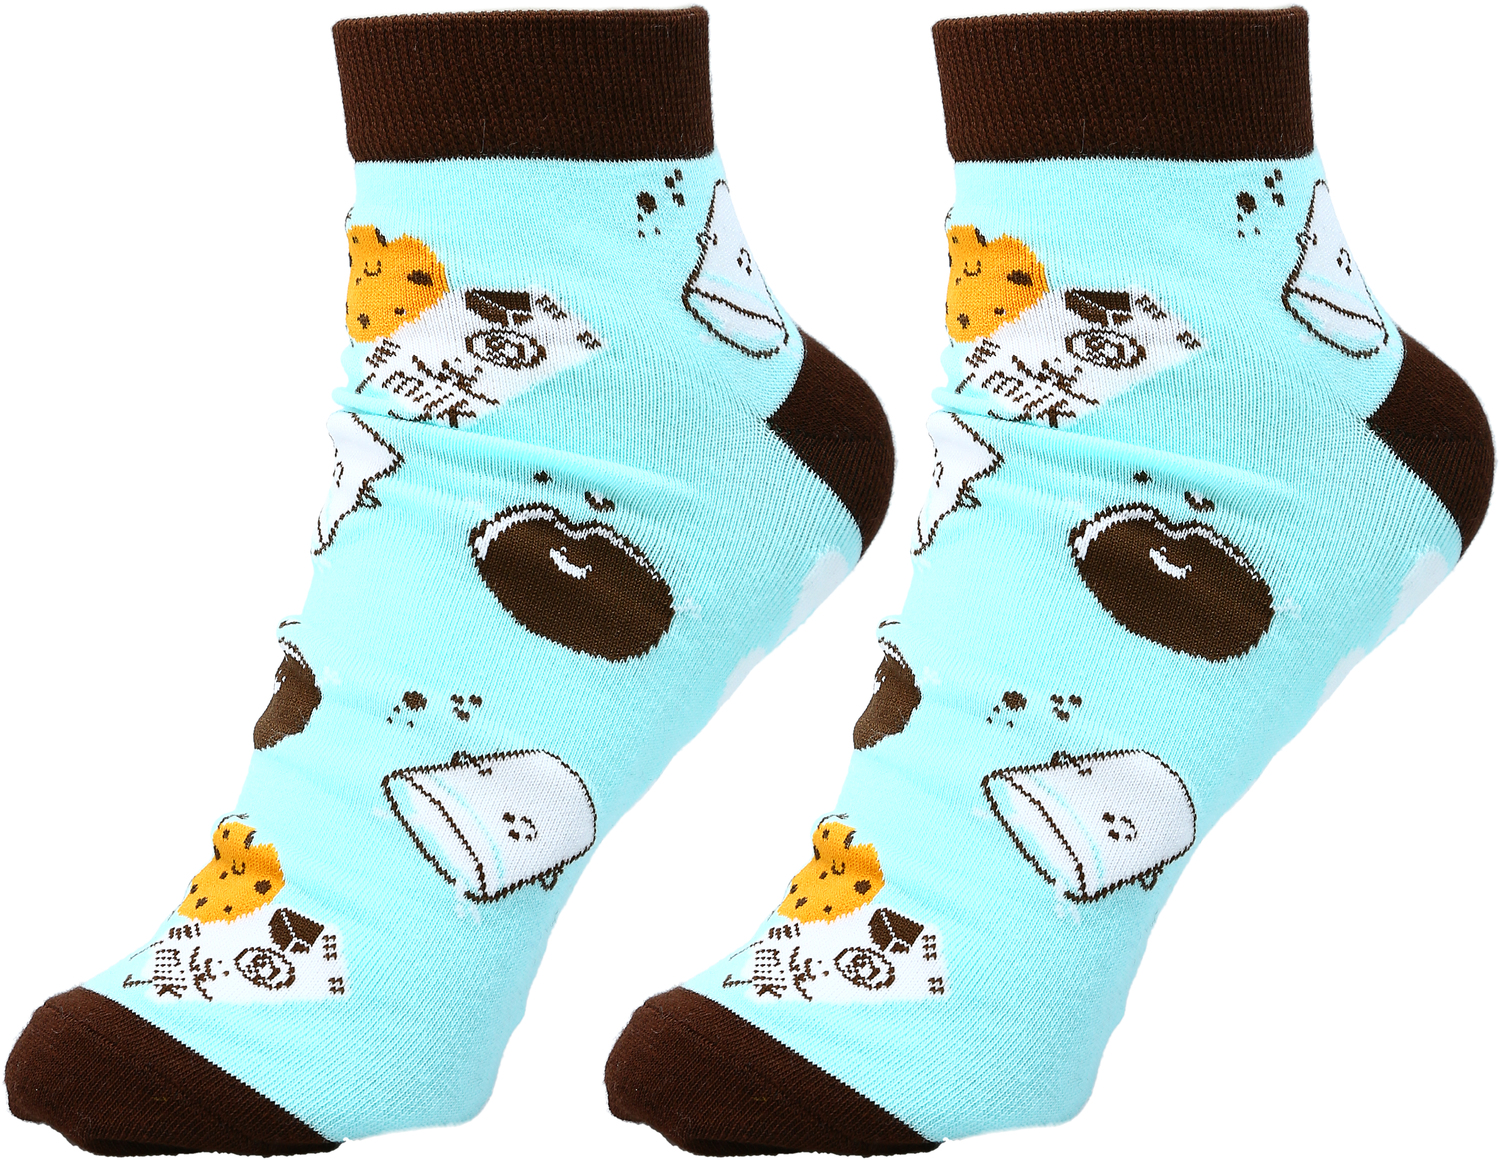 Cookies and Milk by Late Night Snacks - Cookies and Milk - Cotton Blend Ankle Socks